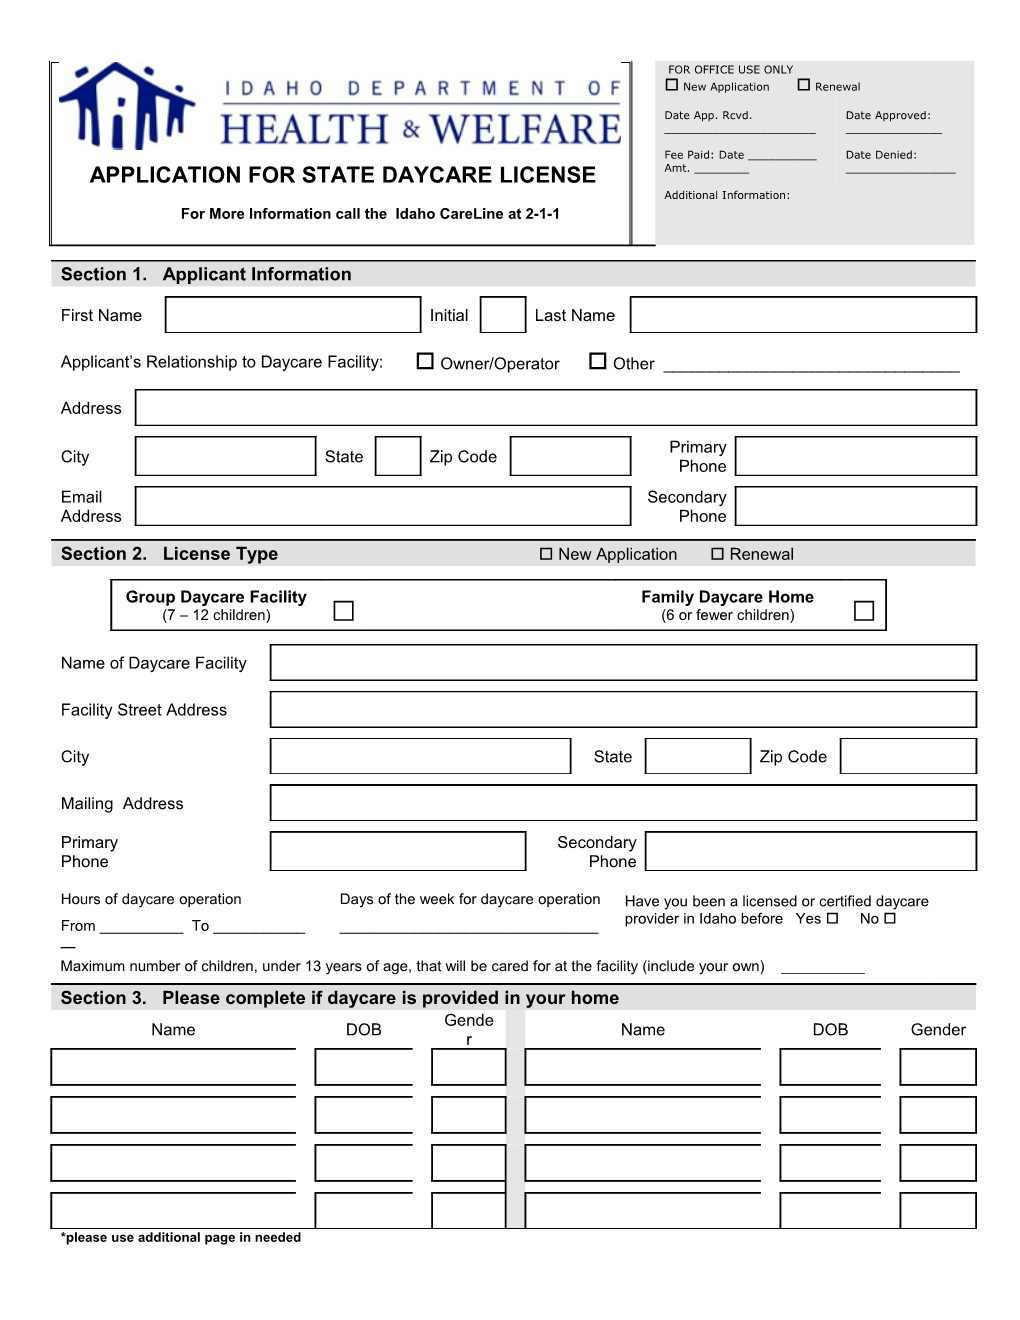 Application for State Daycare License